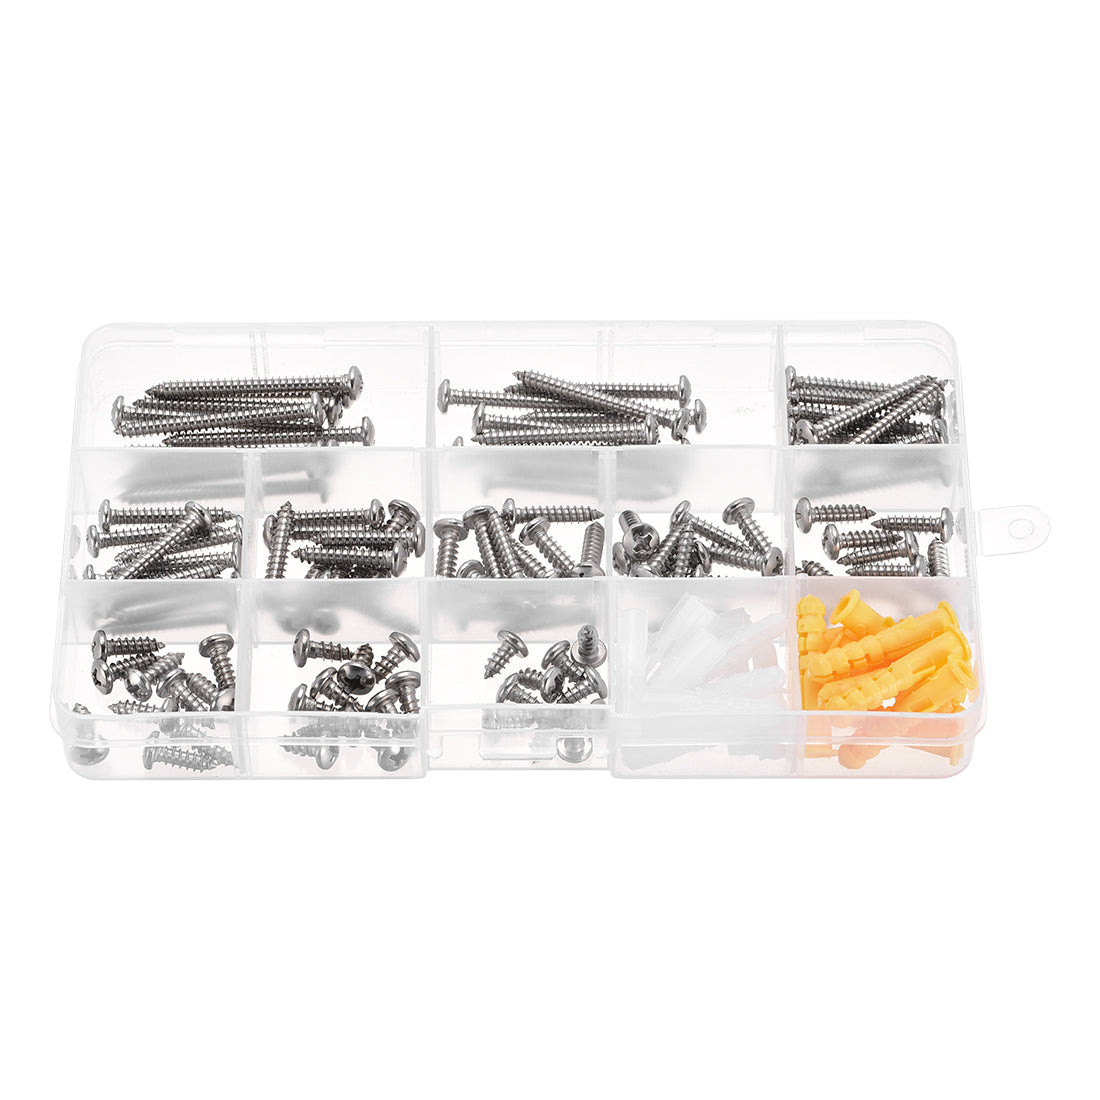 uxcell Uxcell Plastic Expansion Tube Screw Assortment Kit for Drywall White Yellow 130pcs